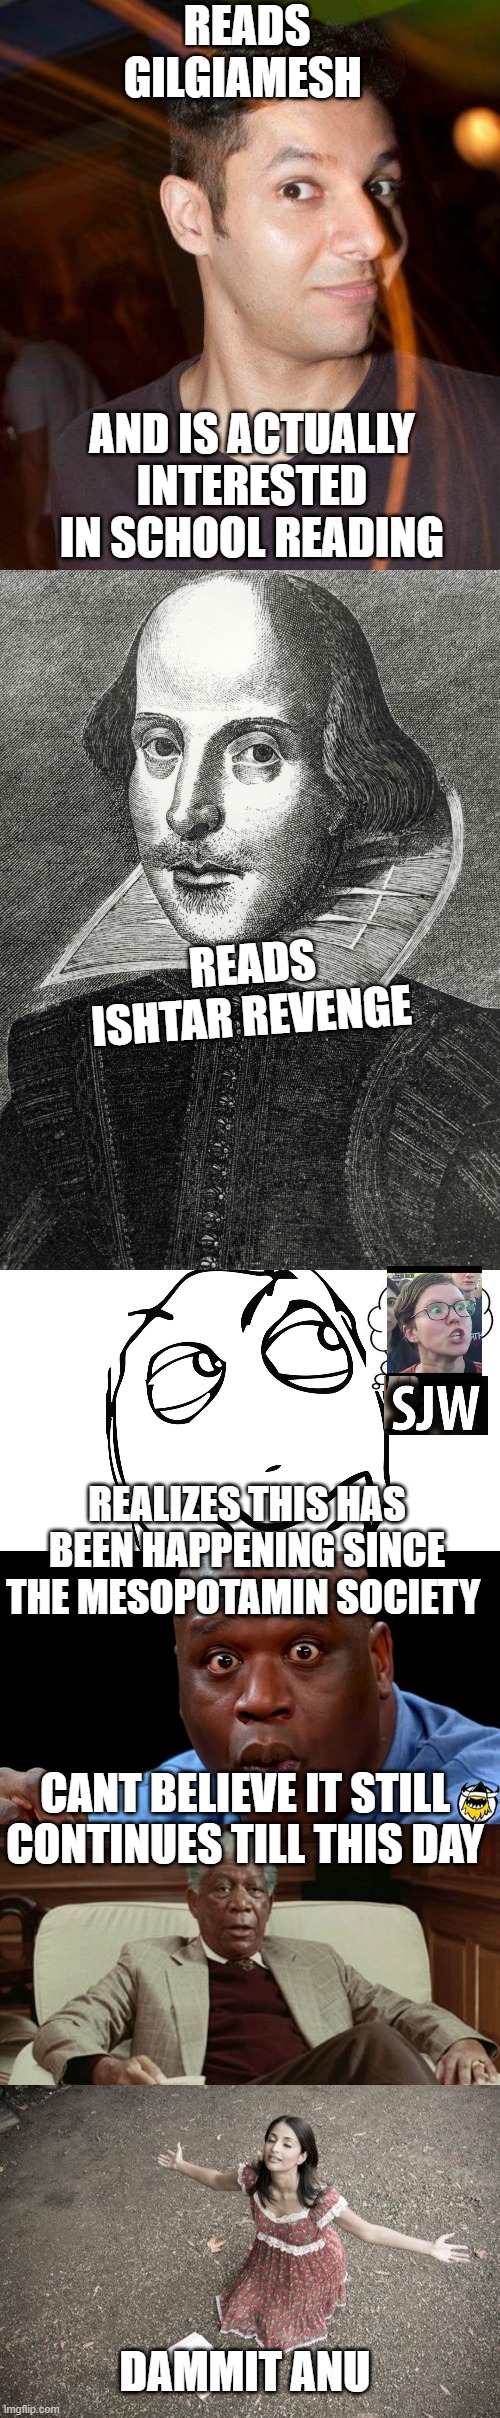 Dammit Anu | READS GILGIAMESH; AND IS ACTUALLY INTERESTED IN SCHOOL READING; READS ISHTAR REVENGE; REALIZES THIS HAS BEEN HAPPENING SINCE THE MESOPOTAMIN SOCIETY; CANT BELIEVE IT STILL CONTINUES TILL THIS DAY; DAMMIT ANU | image tagged in gilgiamesh,anu,ishtar,extra credit | made w/ Imgflip meme maker